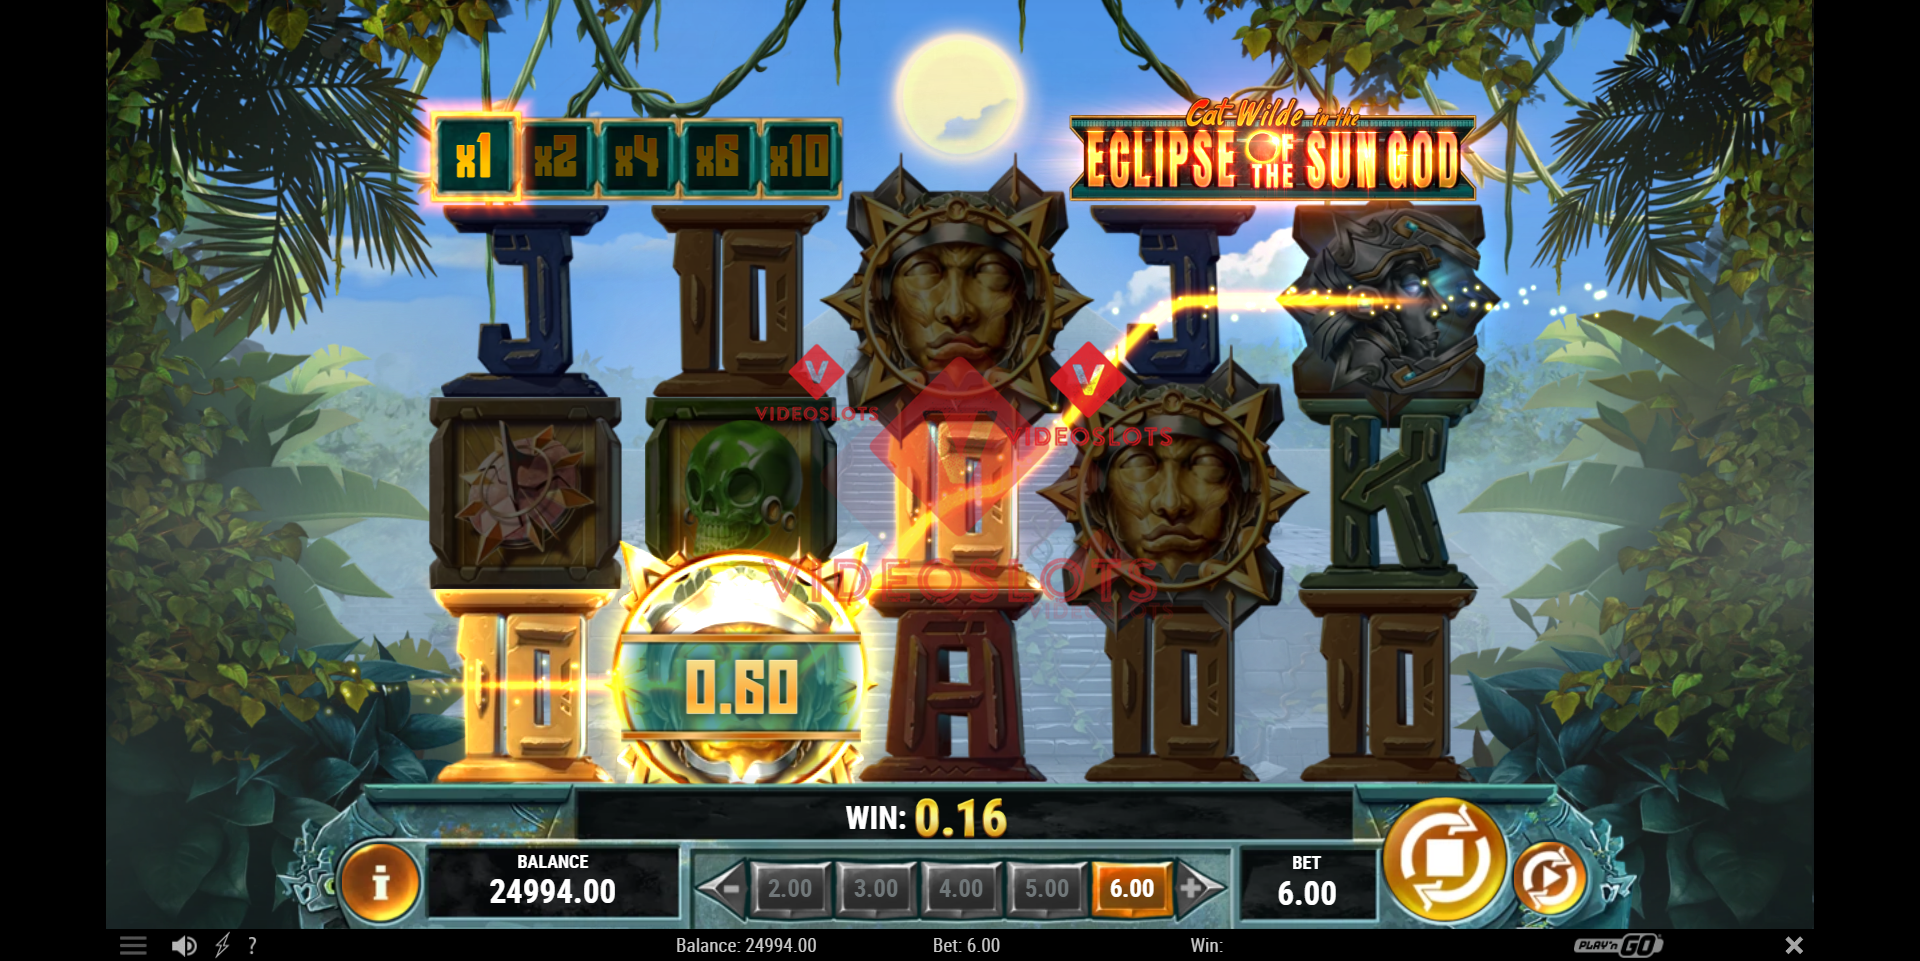 Base Game for Cat Wilde in the Eclipse of the Sun God slot from Play'n Go